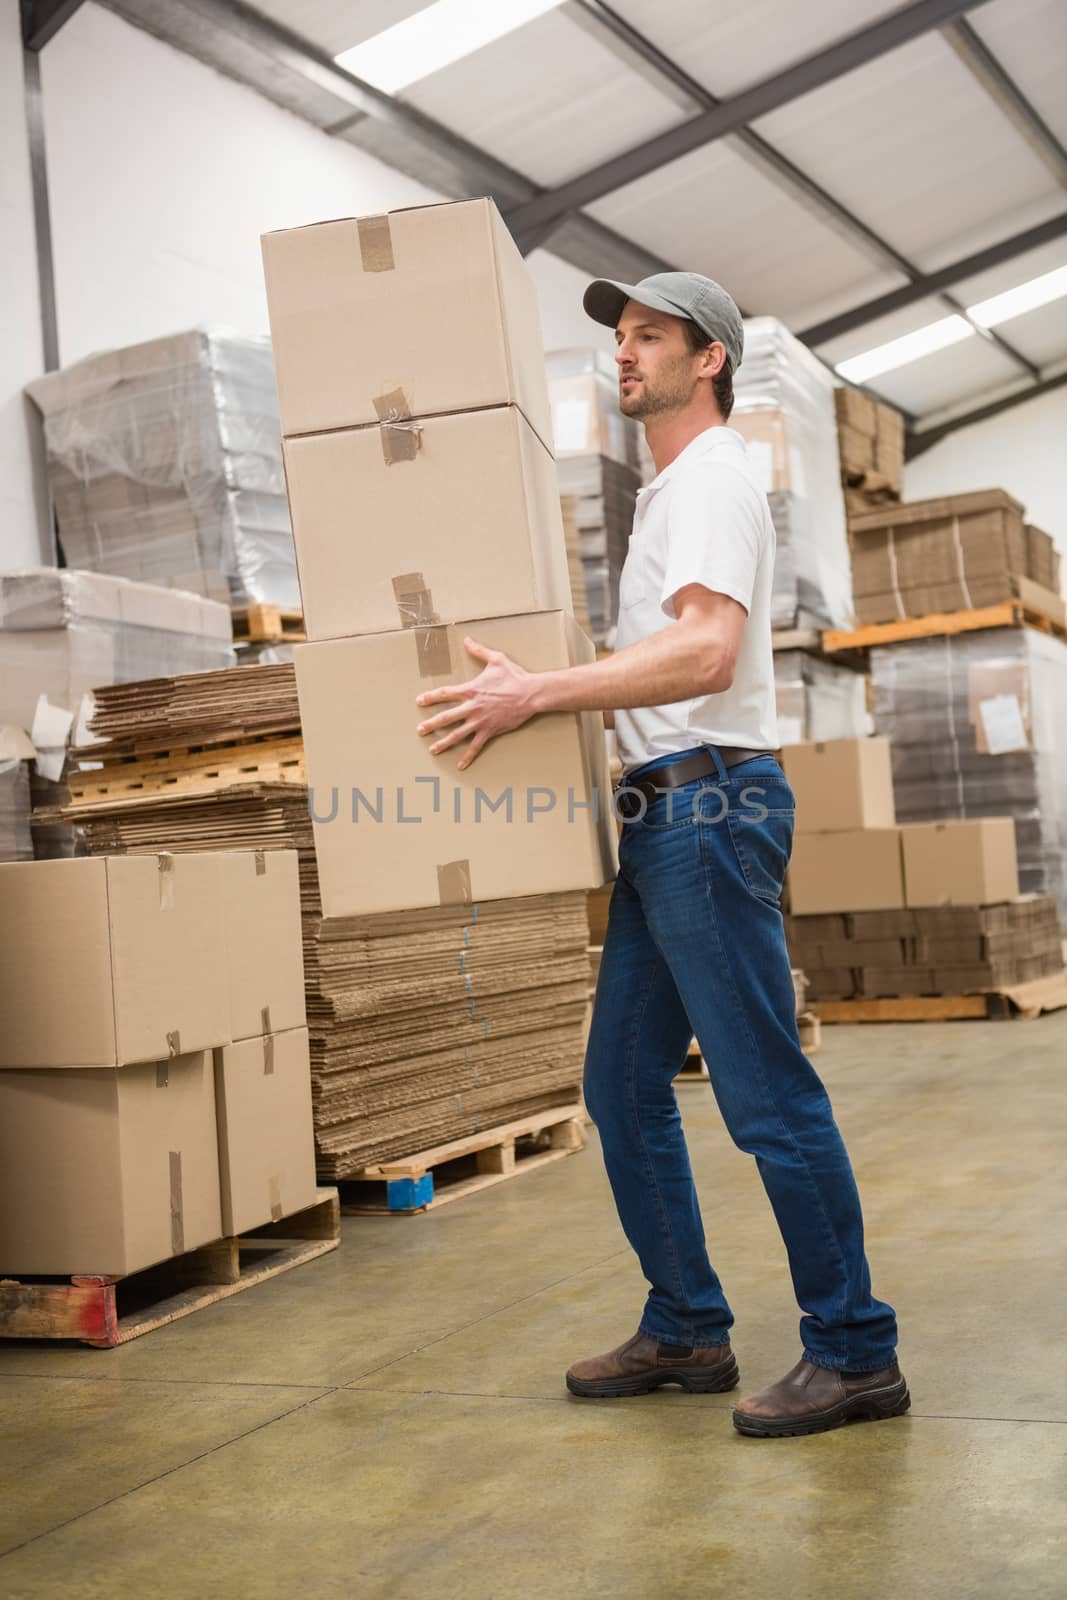 Side view of worker carrying boxes in warehouse